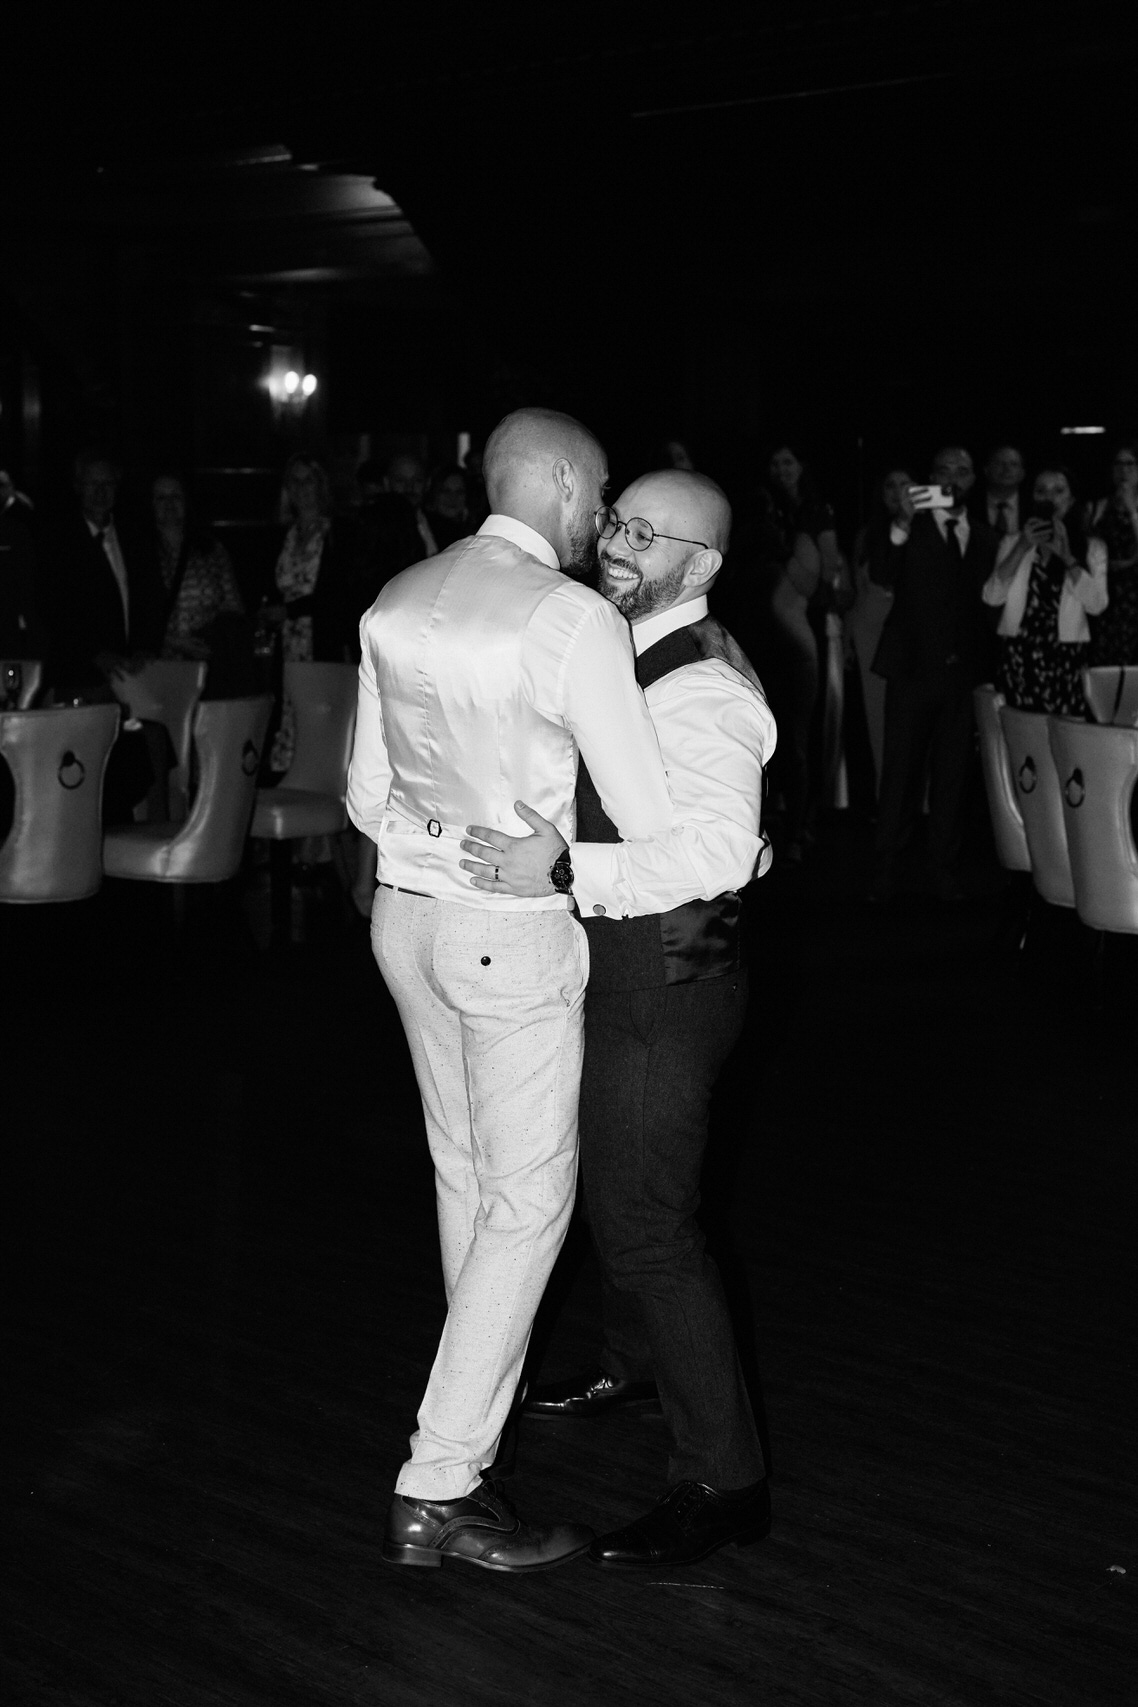 A black and white picture of two guys having a dance at a wedding.